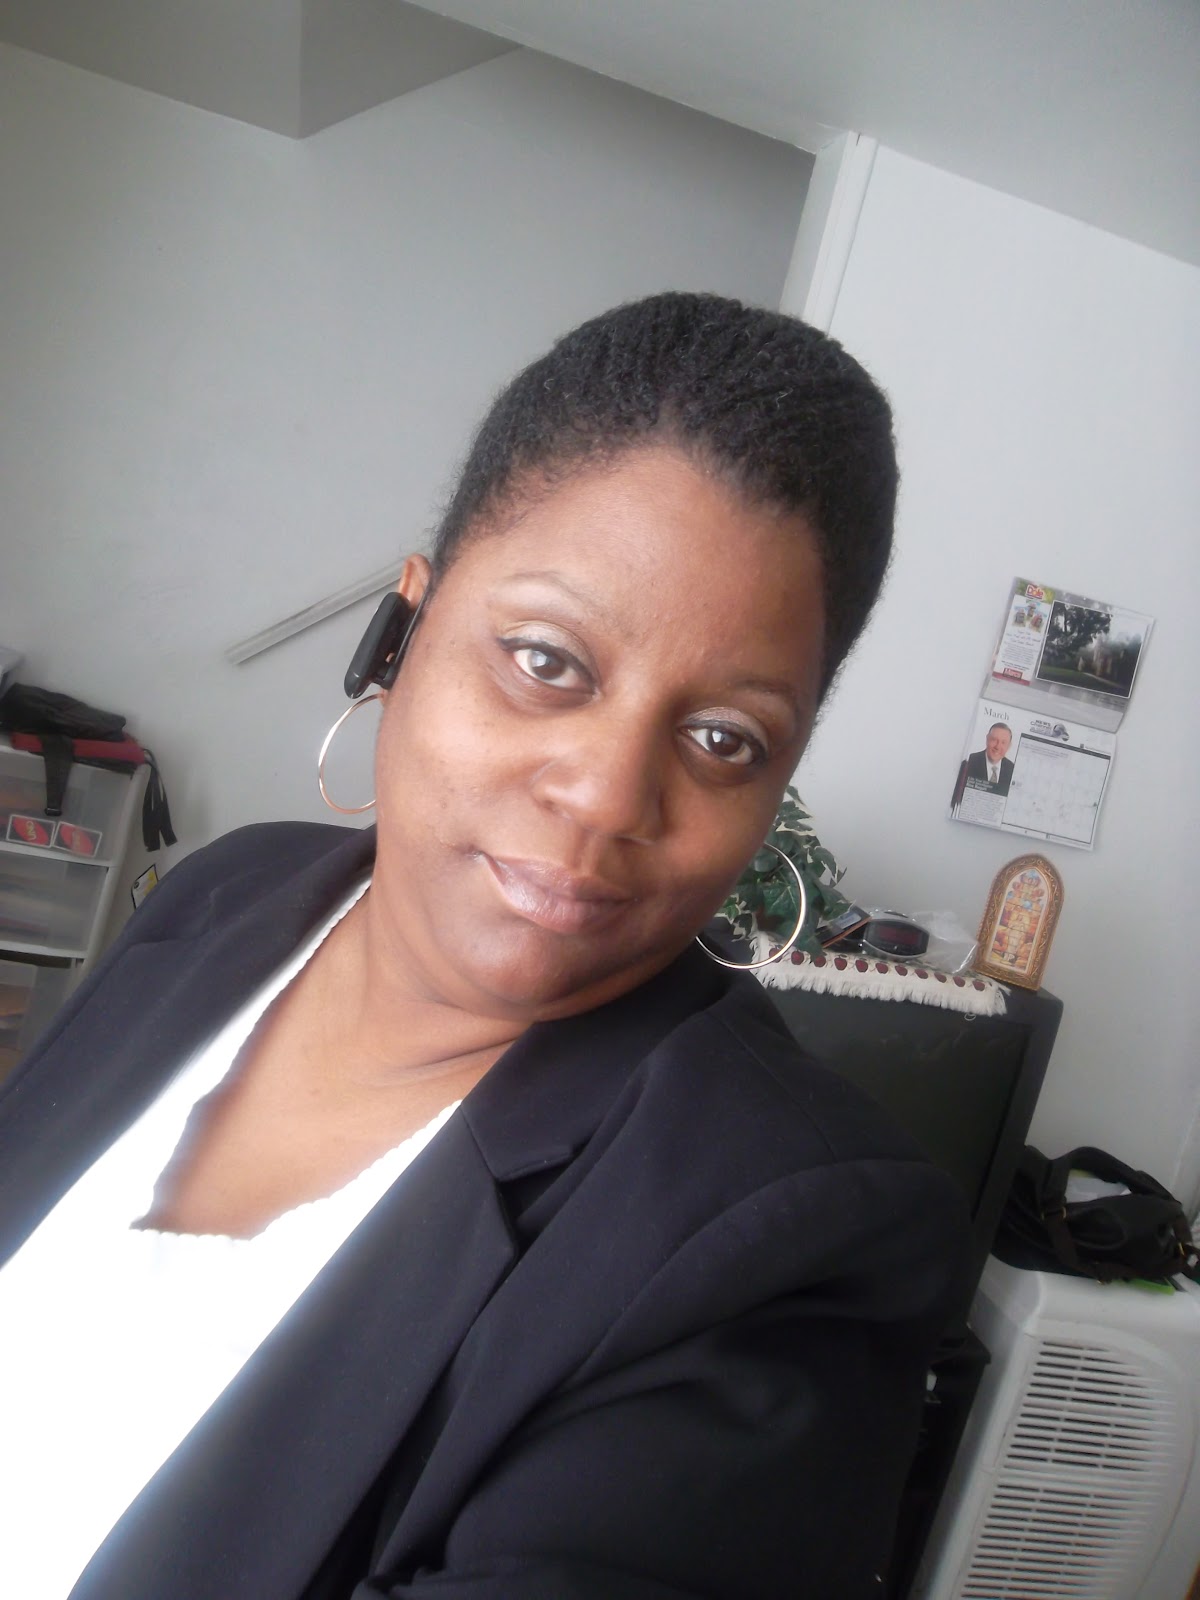 My Natural Hair Journey Looking Professional For Job Search Or